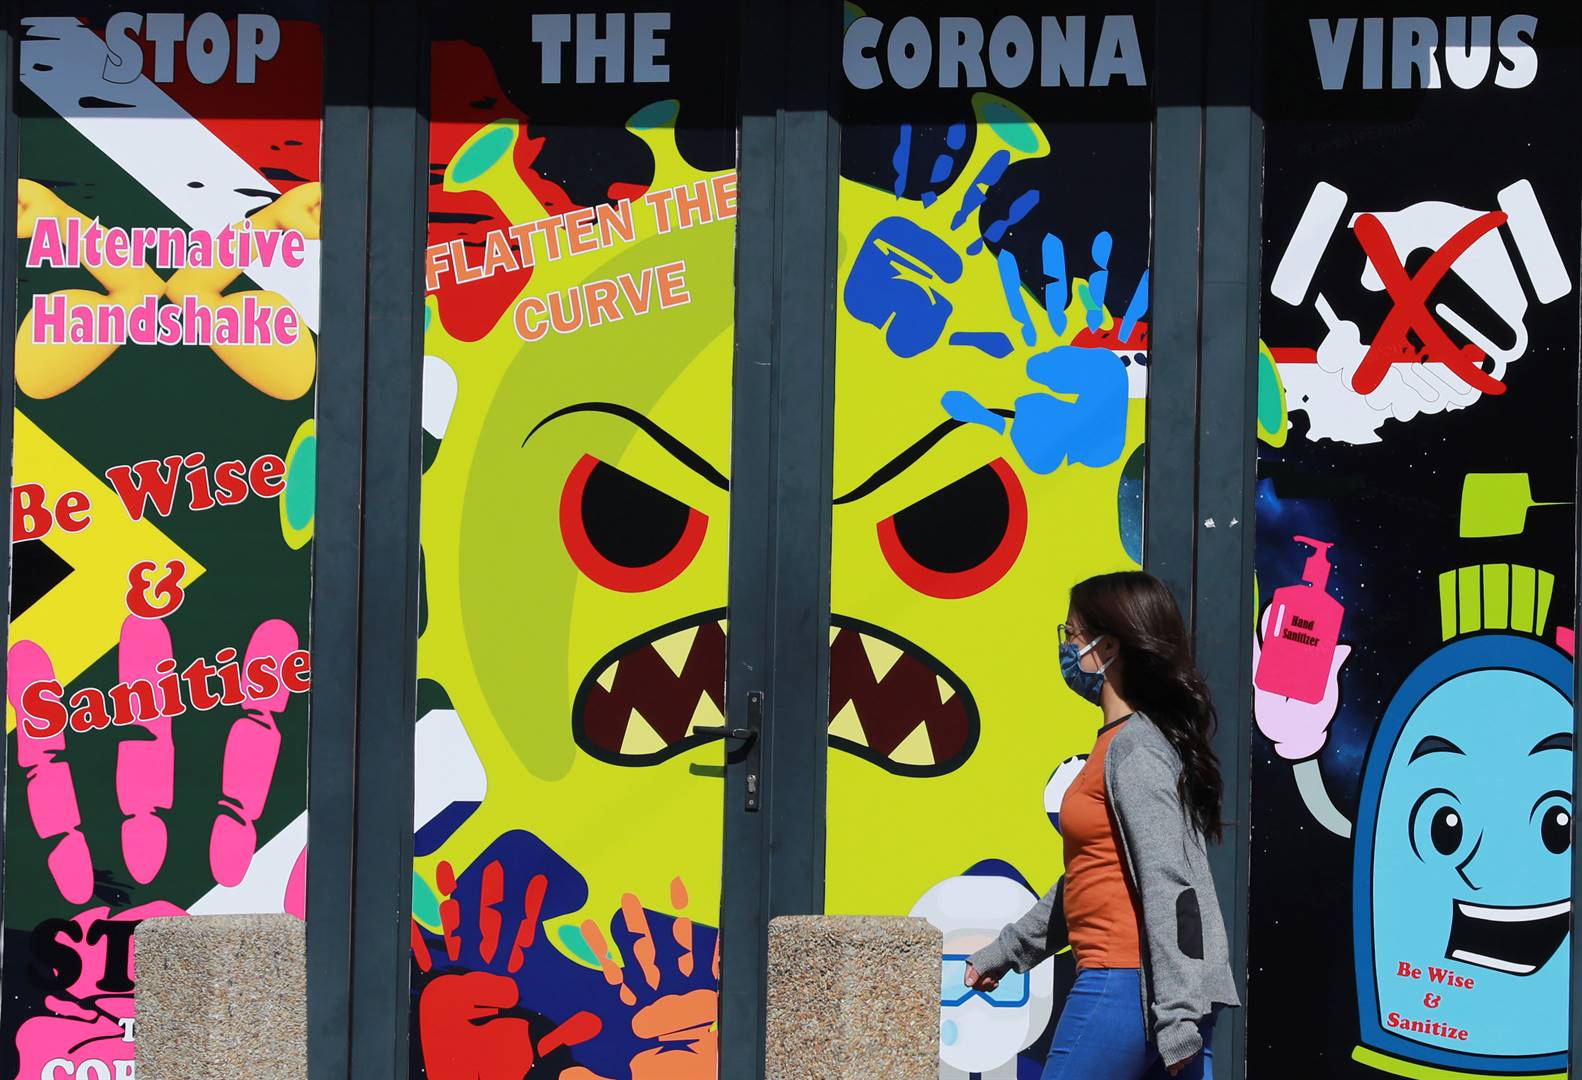 A woman wearing a face mask to prevent the spread of the Covid-19 walks past a mural in Cape Town during the third week of lockdown to contain the spread of the pandemic. Picture: Nardus Engelbrecht/AP Photo